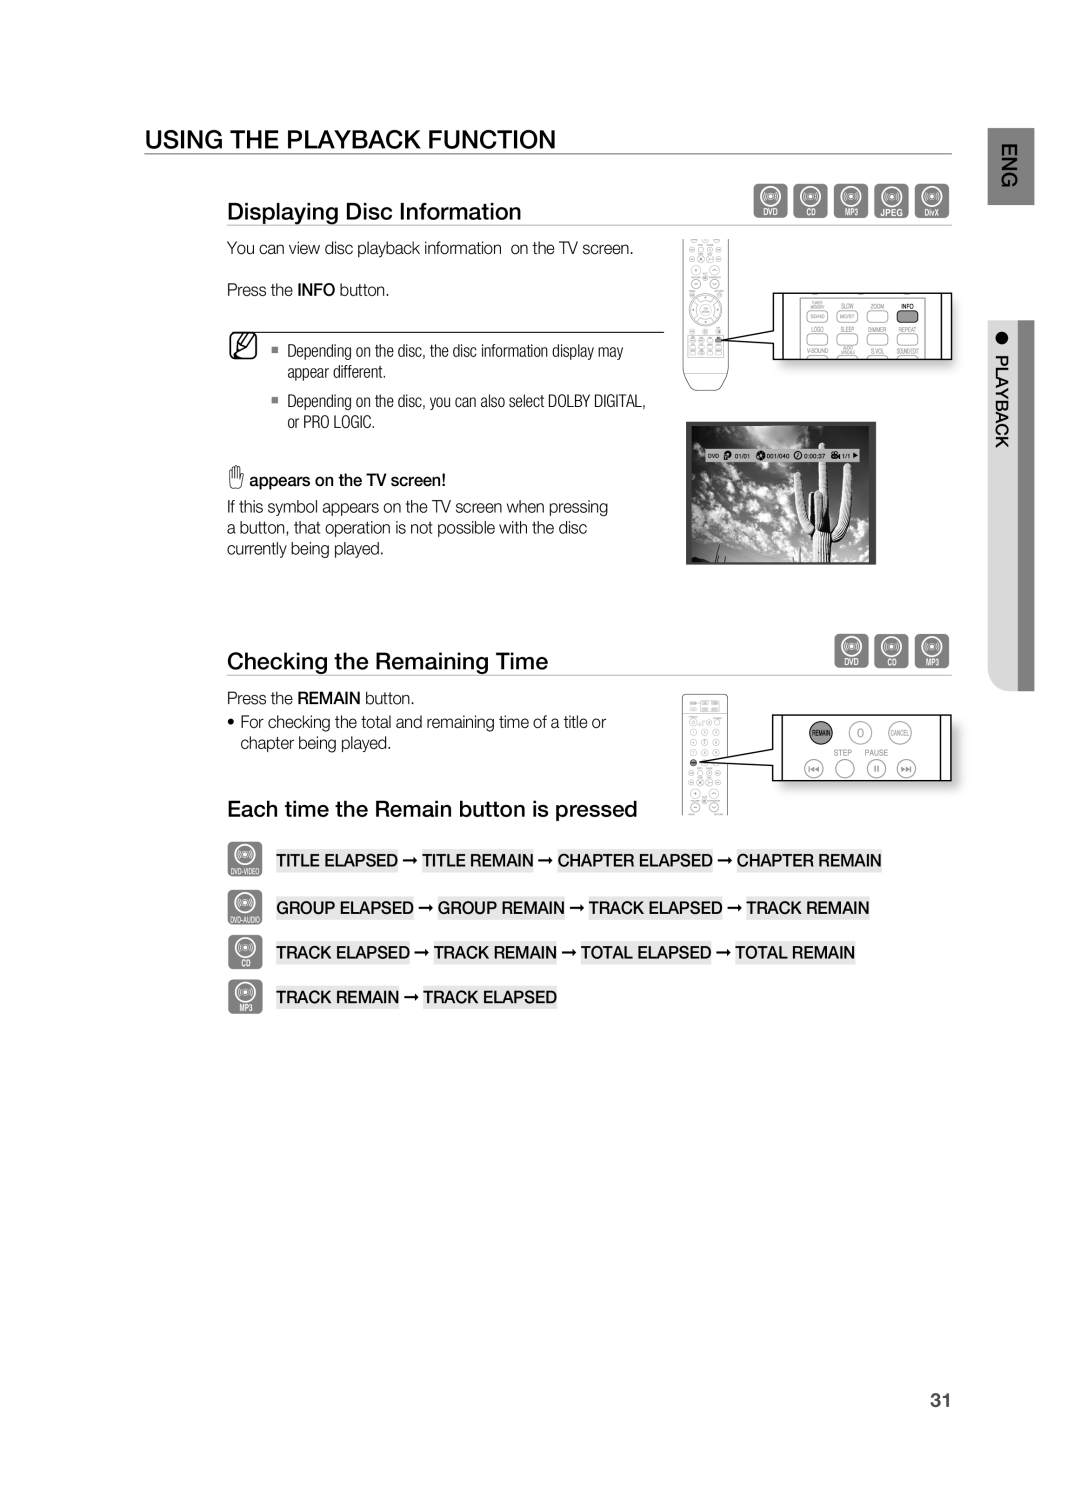 Sony HT-X810 user manual Bagd, USING THE PlAYBACK FUNCTION, Displaying Disc Information, Checking the remaining Time 